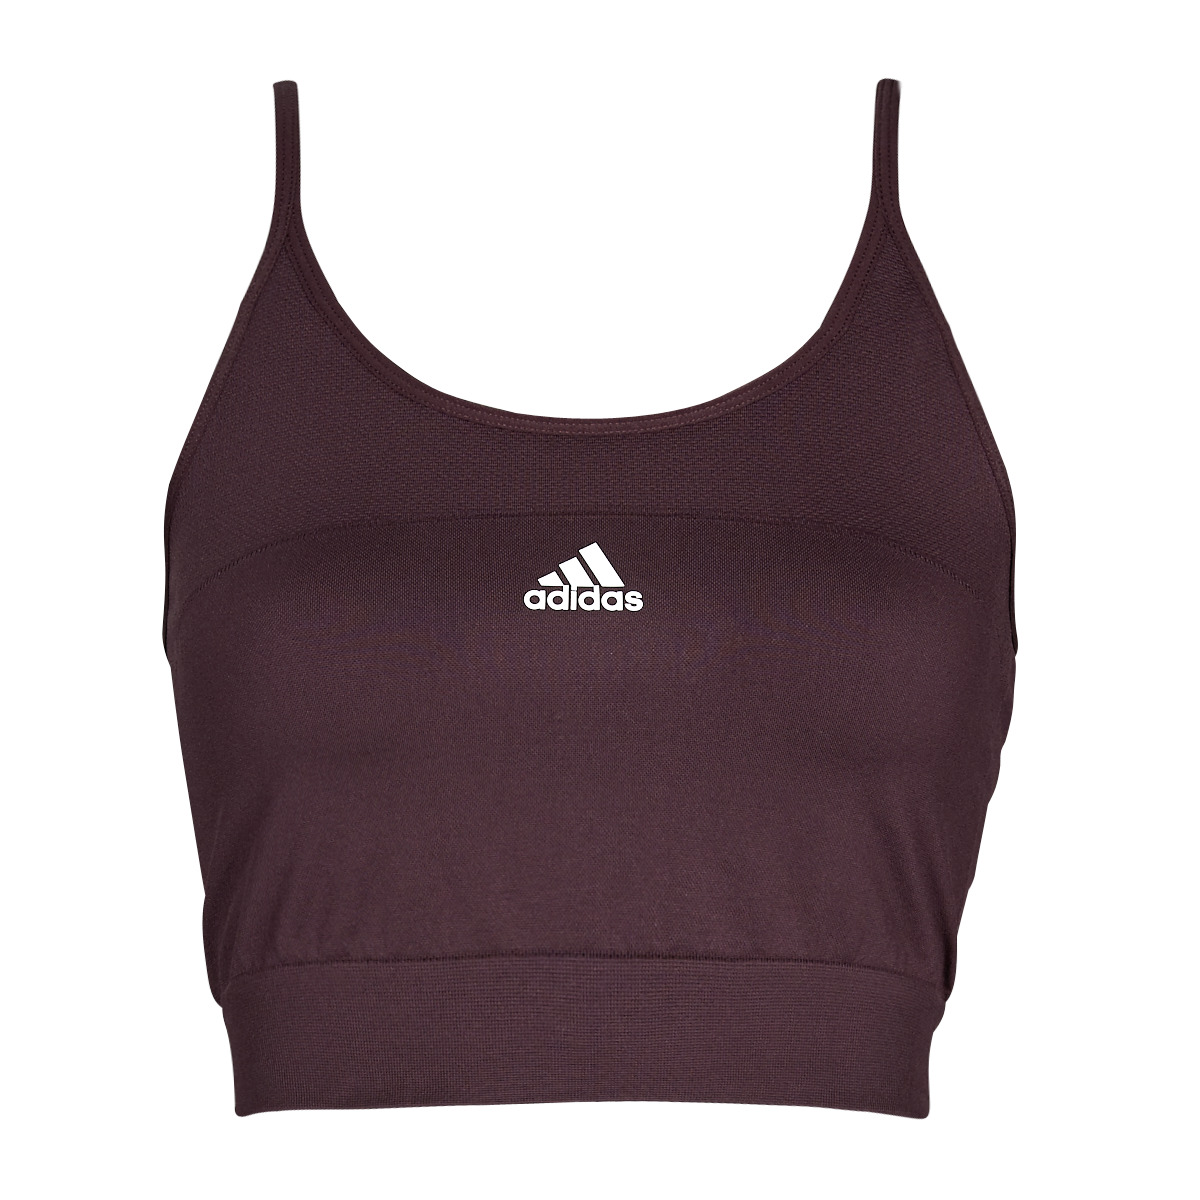 adidas Performance bordeaux ombre W SML SPAGCROP wvMLODct